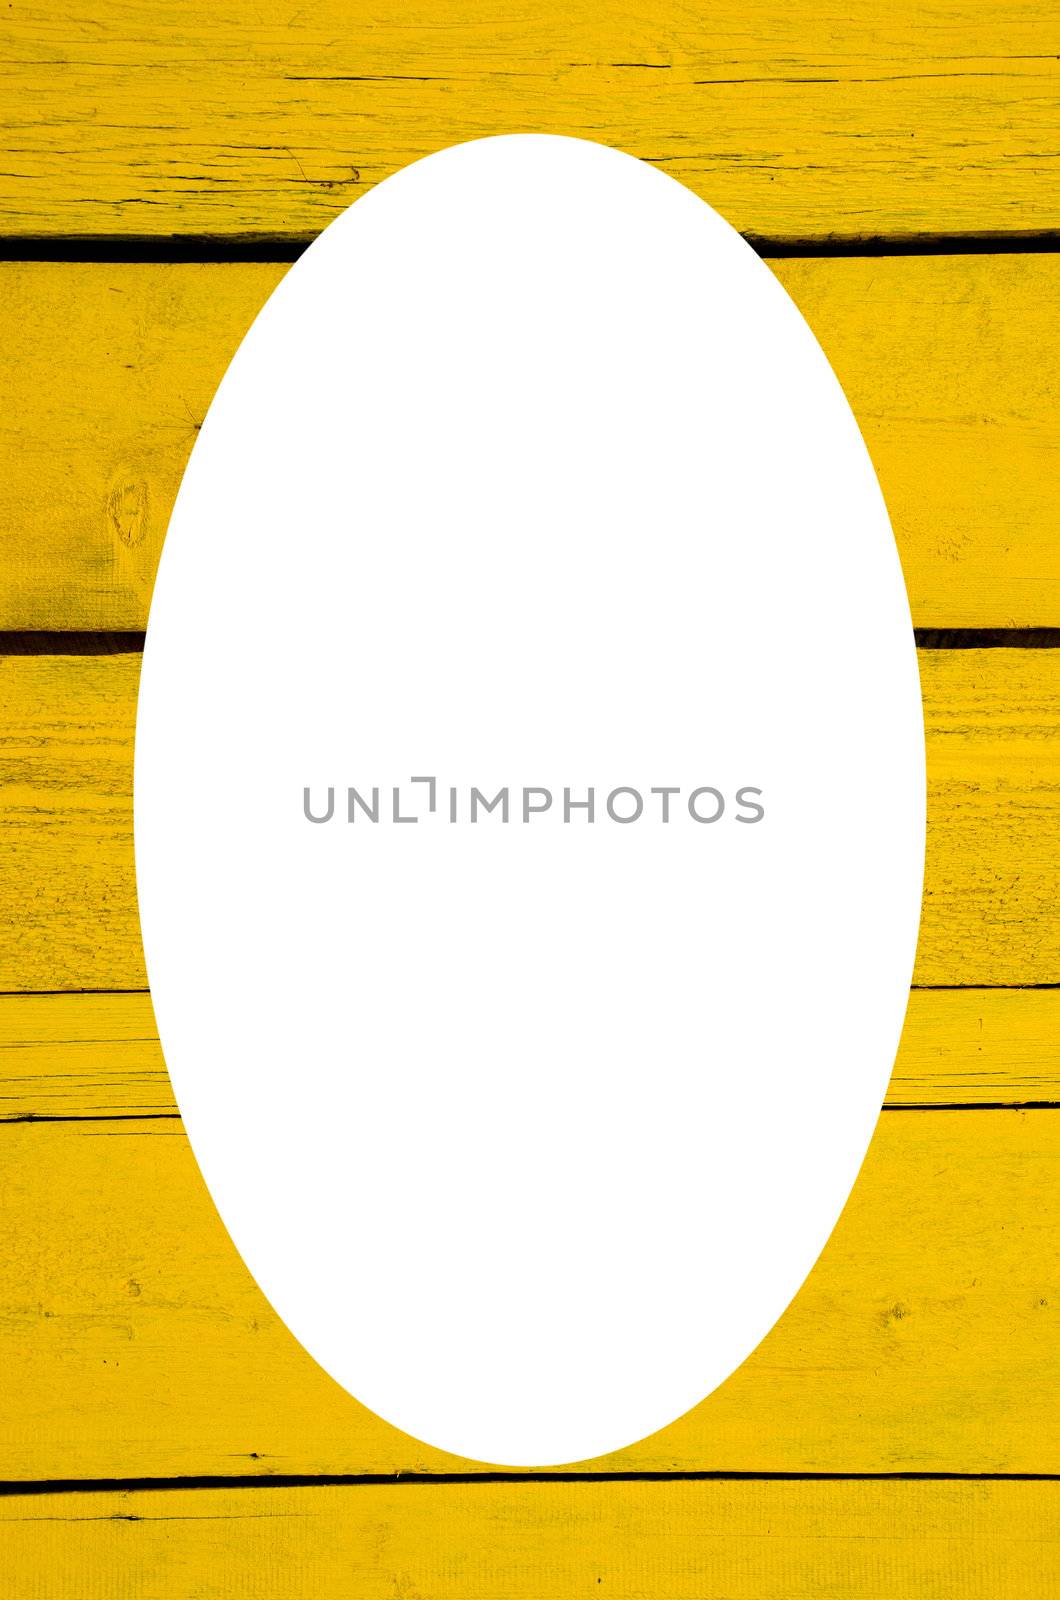 Wall made of yellow wooden planks and white oval by sauletas